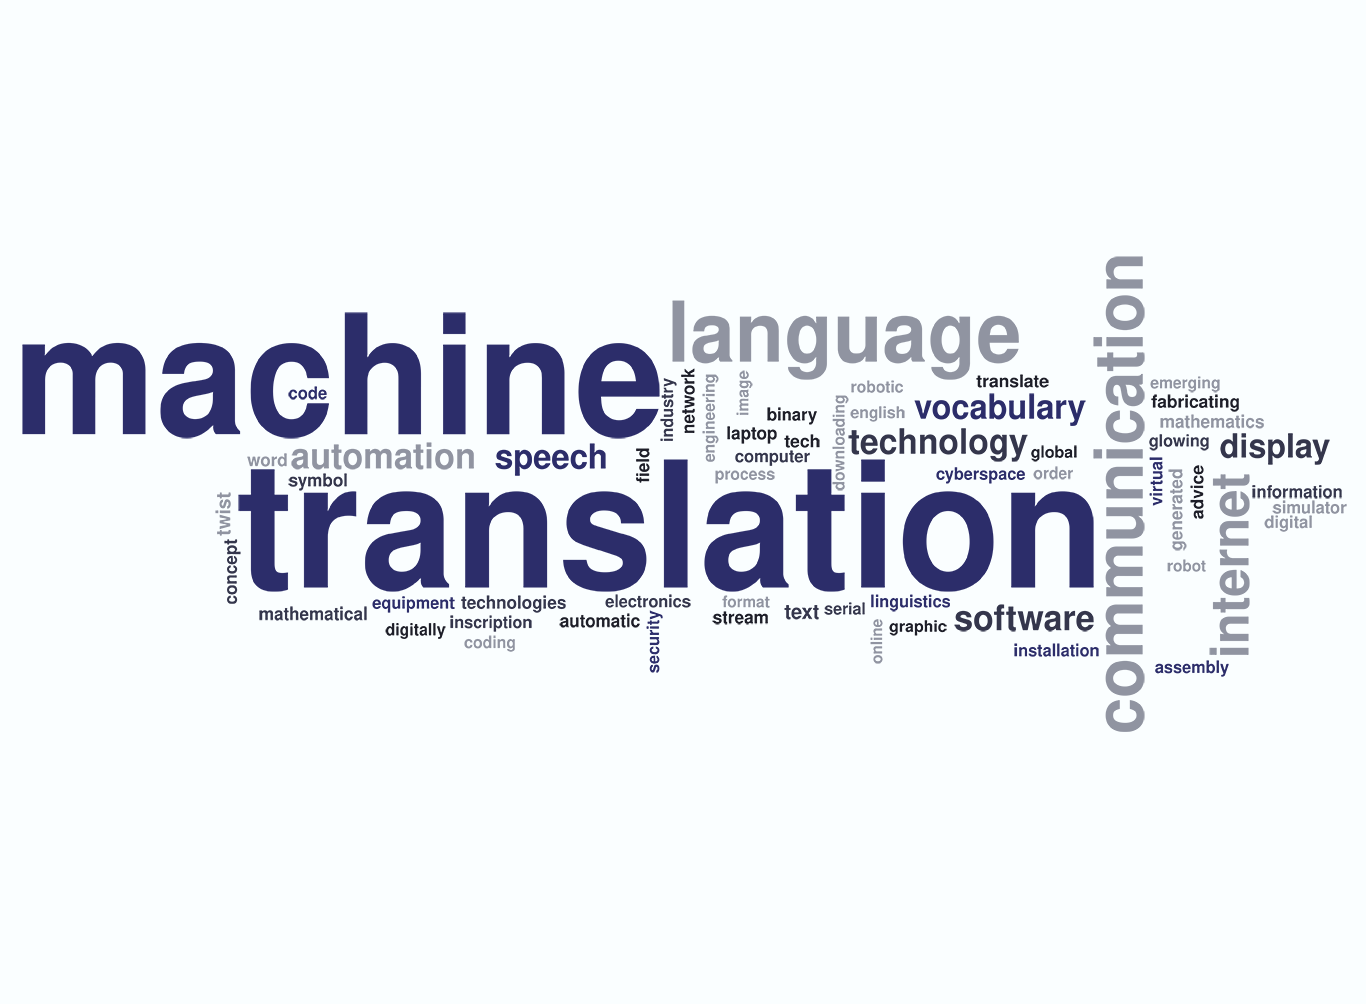 Why automatic (machine) translation may be a useful feature for content localization